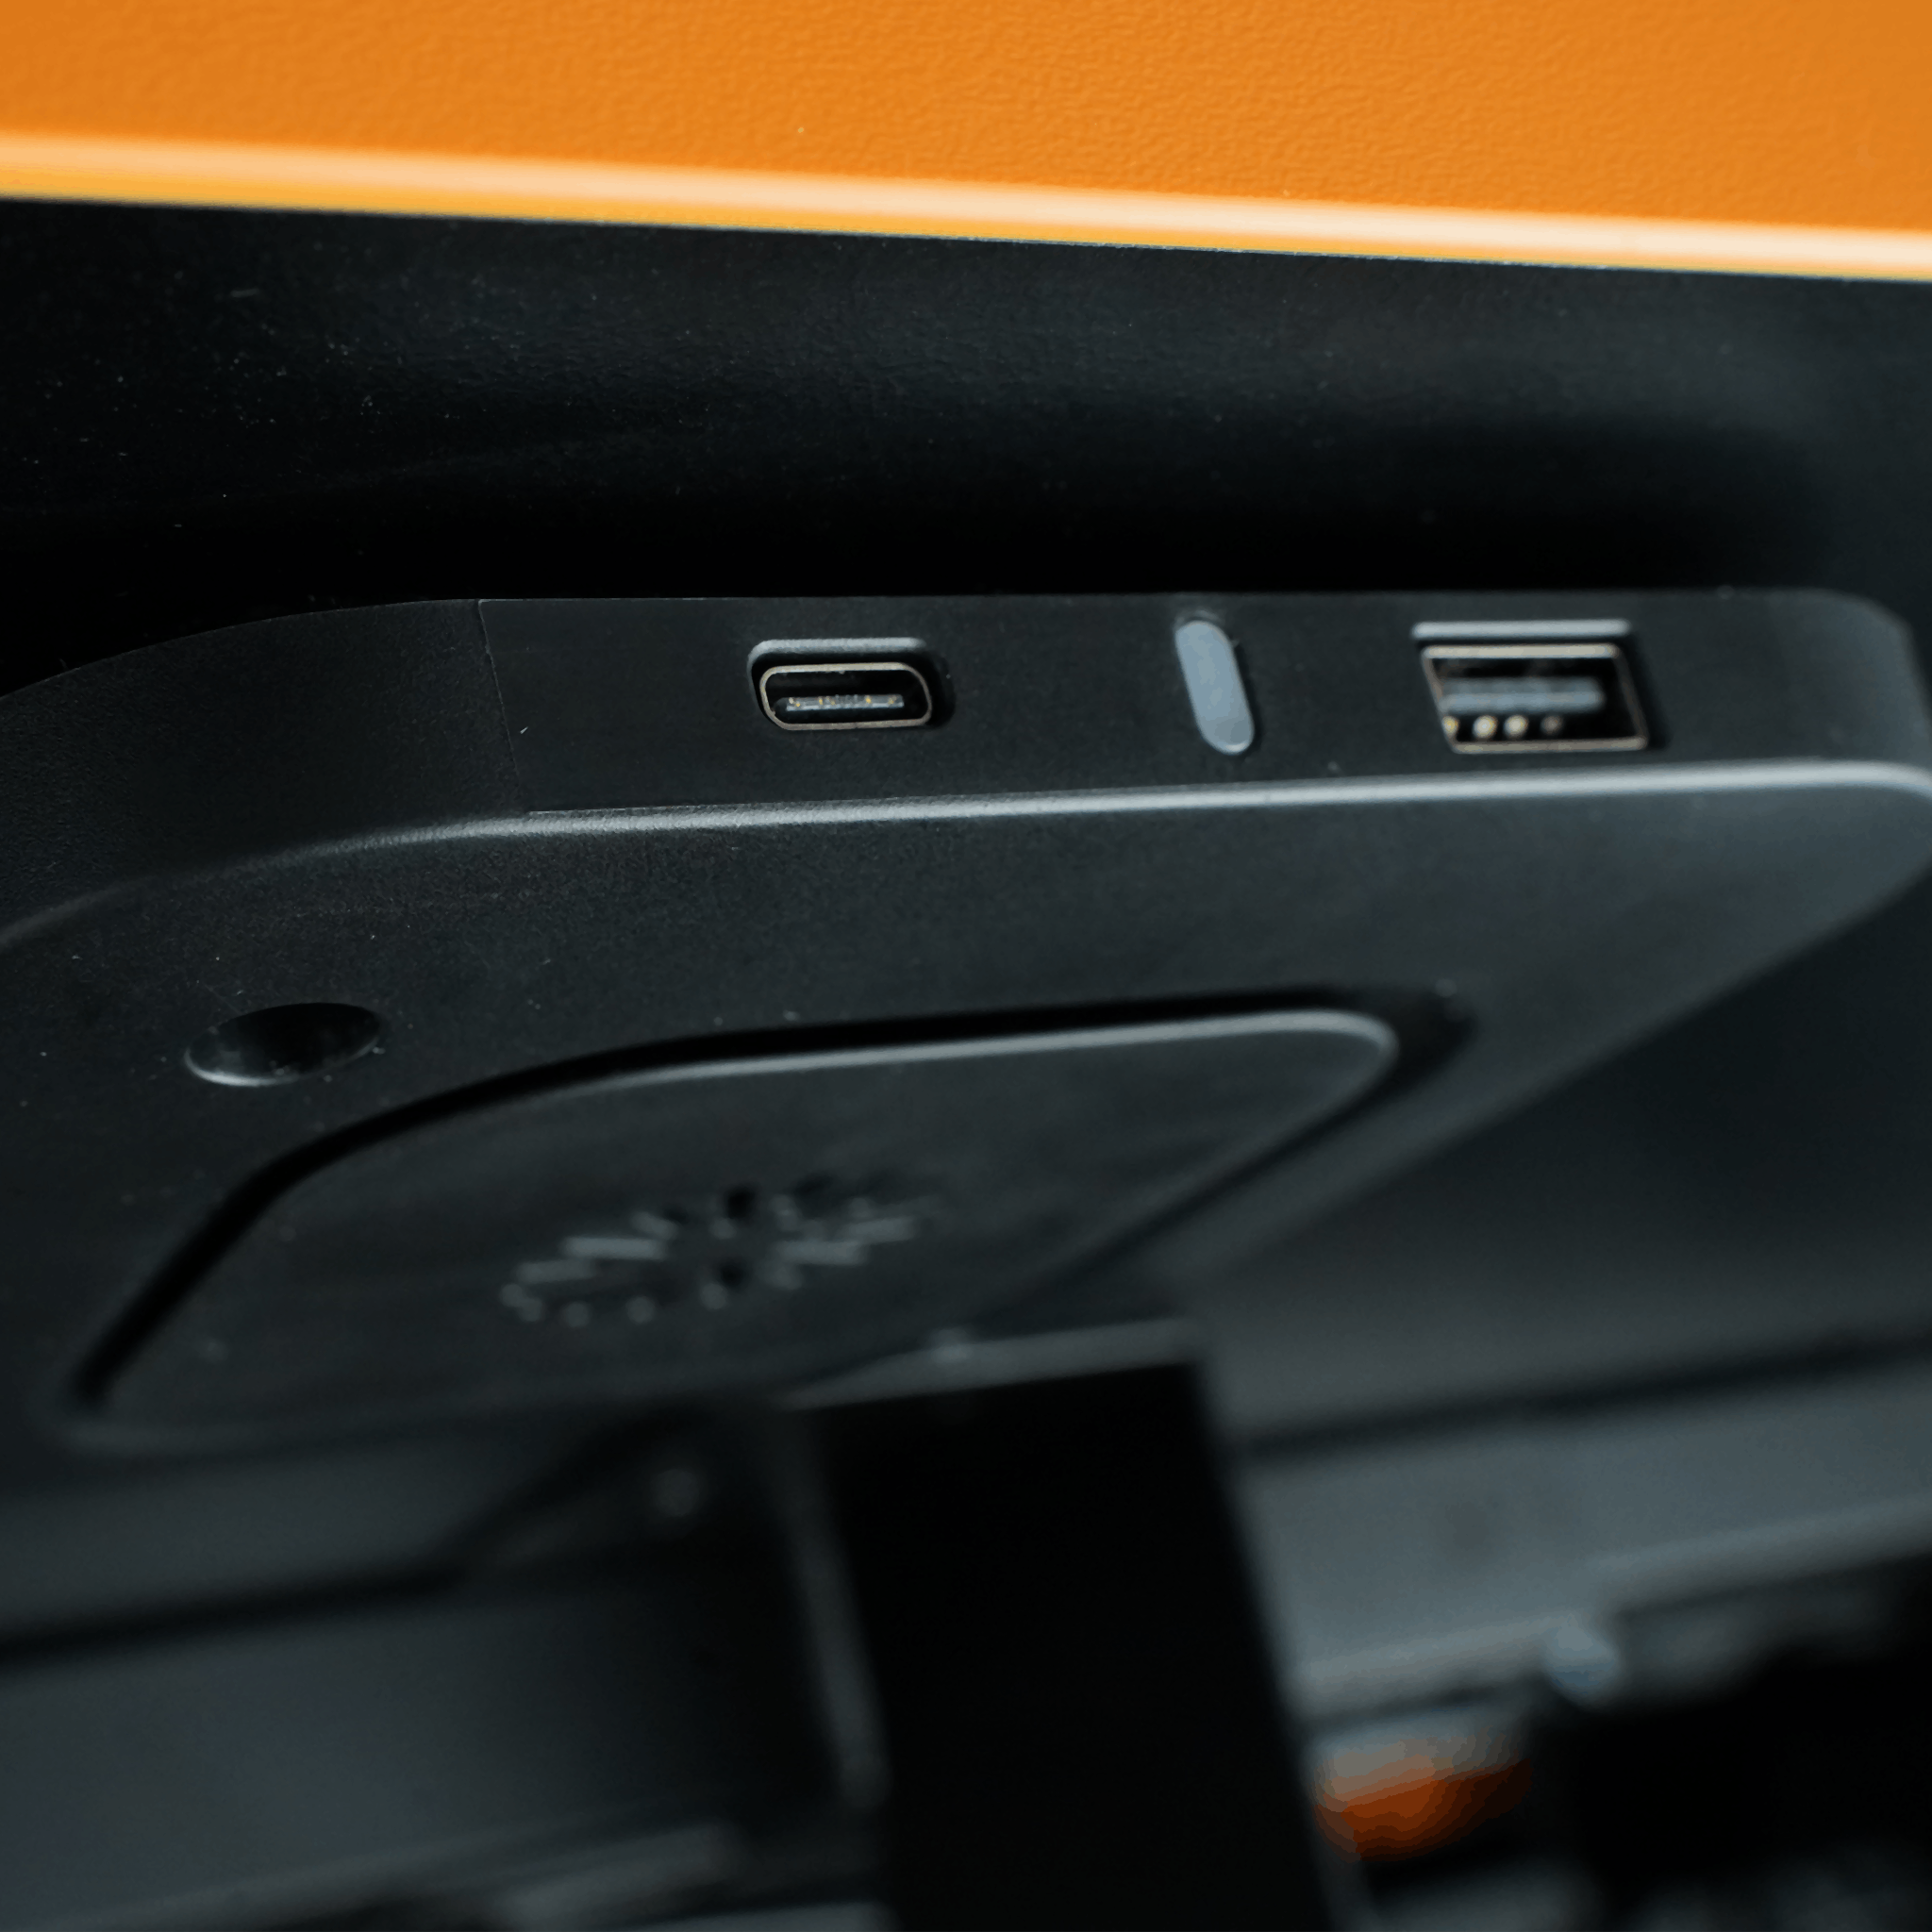 The LeetDesk induction charger also has 2 USB ports for charging via cable